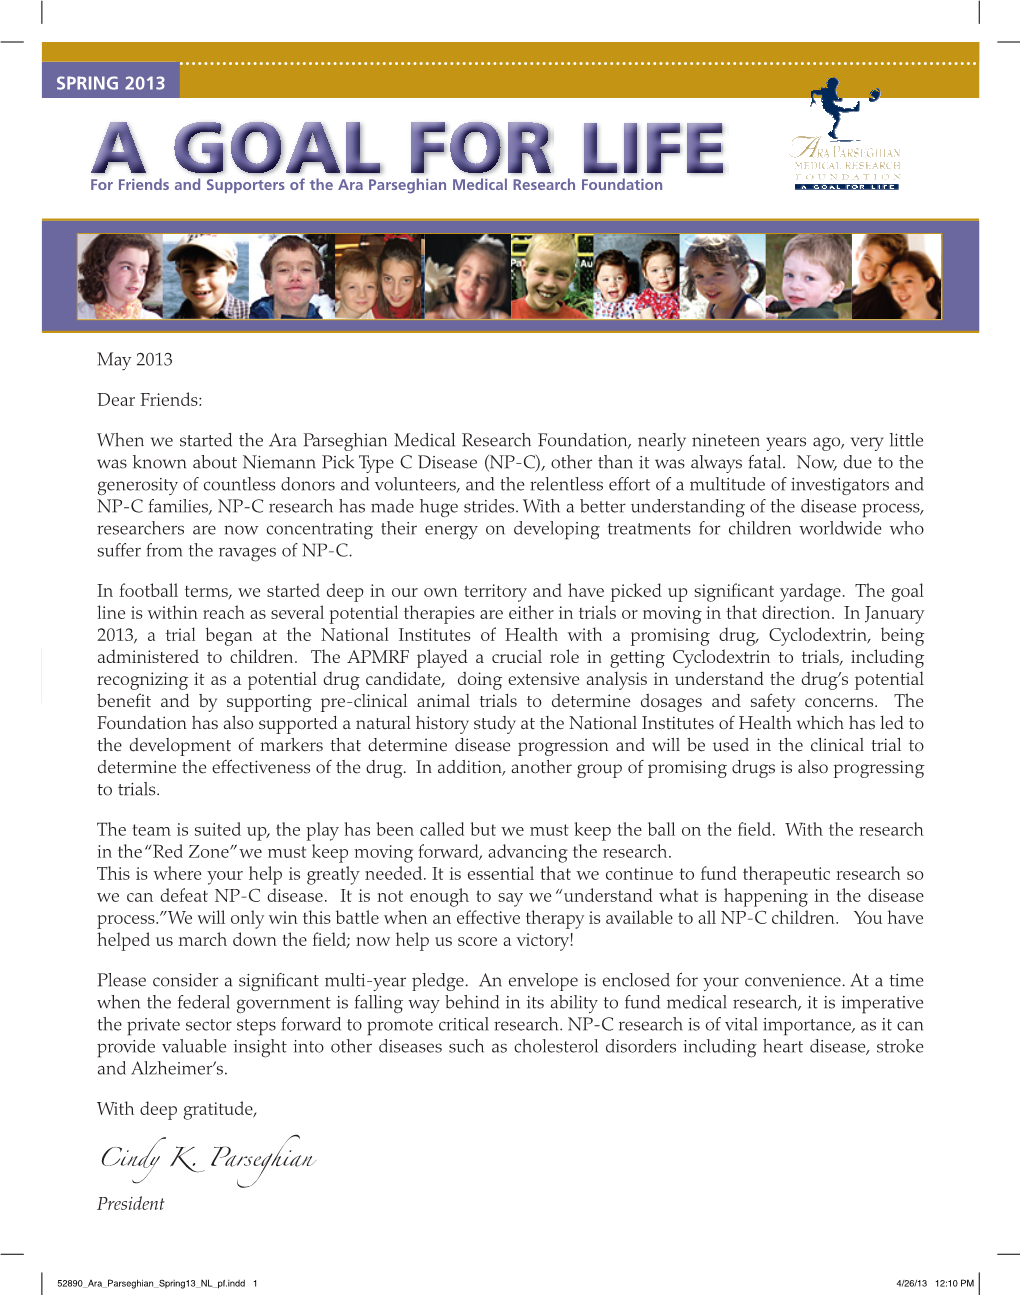 SPRING 2013 a GOAL for LIFE for Friends and Supporters of the Ara Parseghian Medical Research Foundation